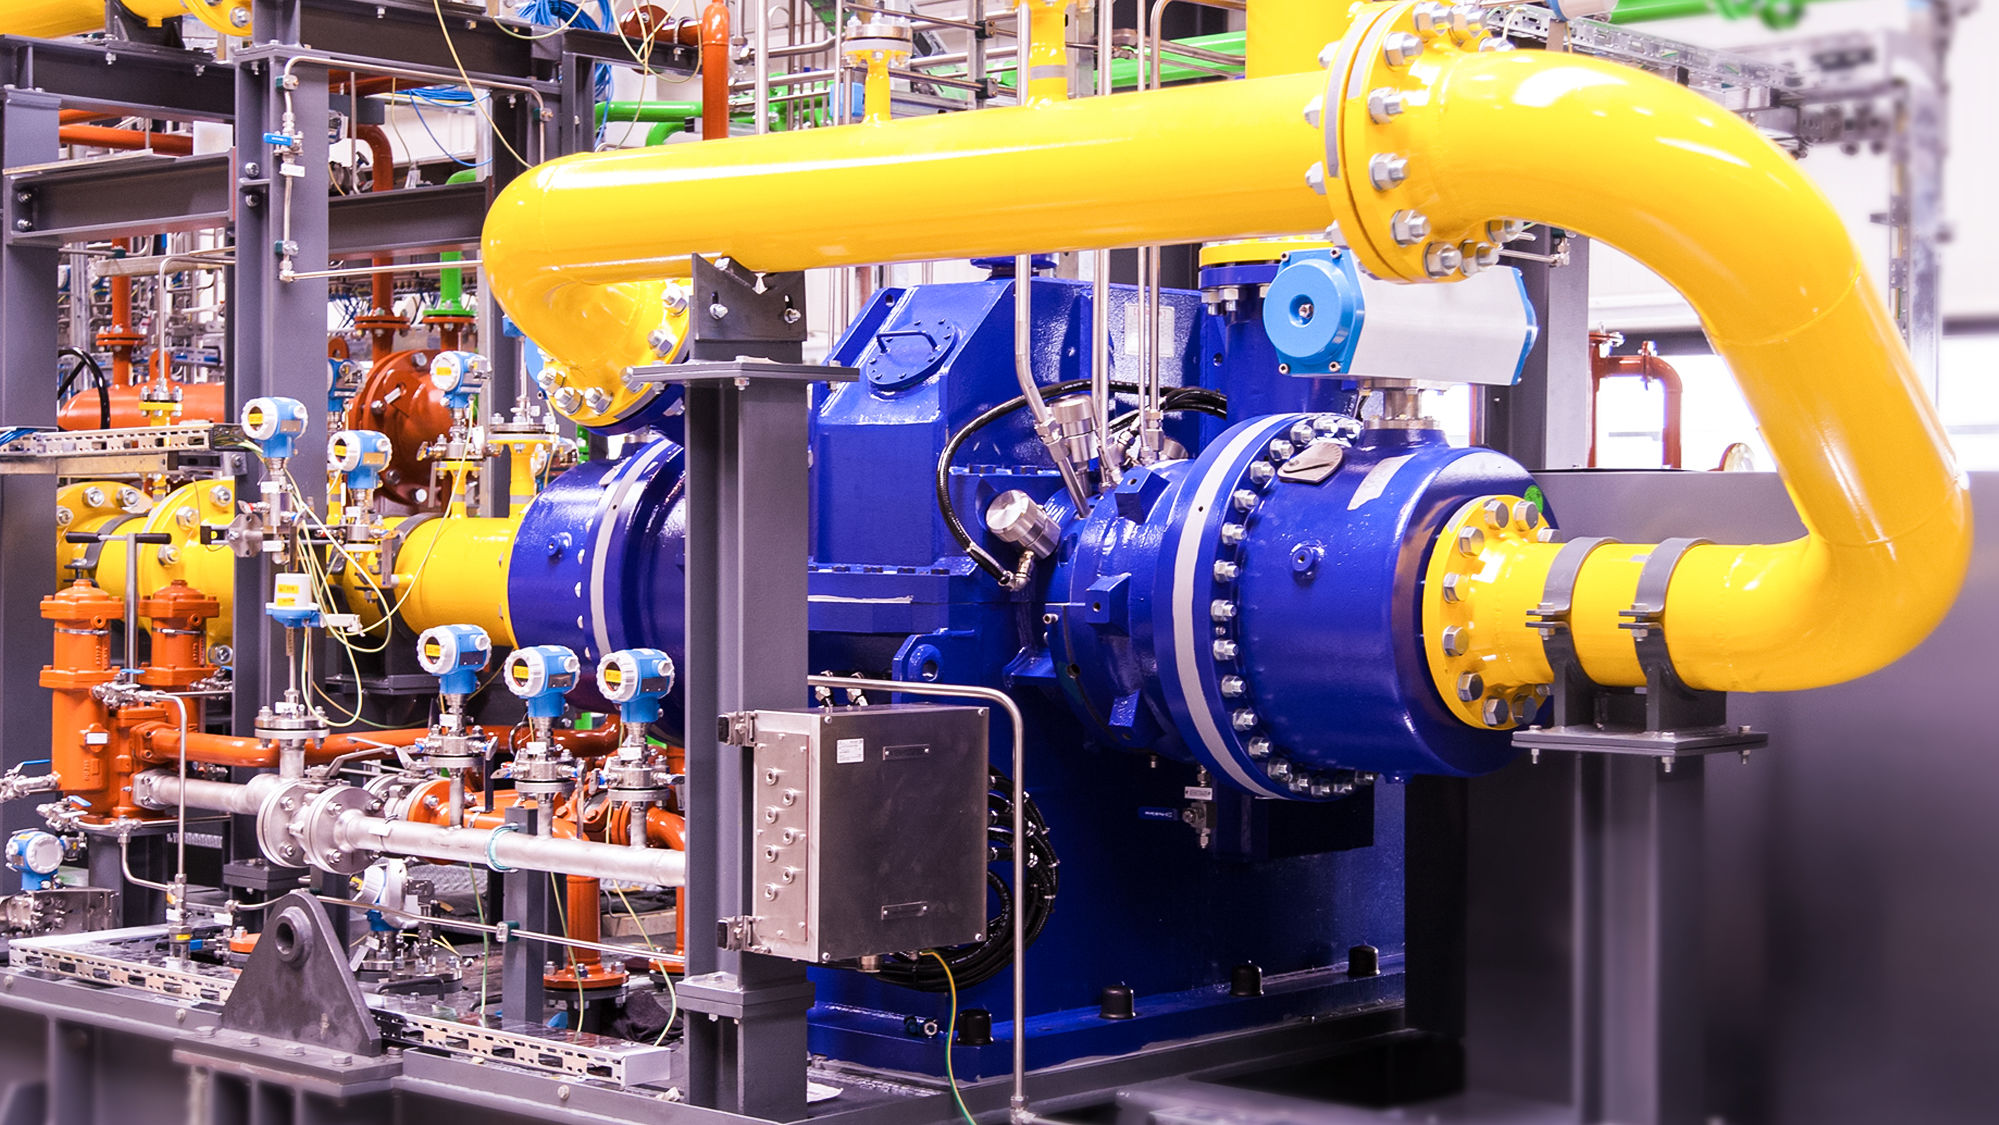 A blue 2-stage integrally geared centrifugal compressor with yellow process gas lines and measuring equipment is shown, mounted on a skid.